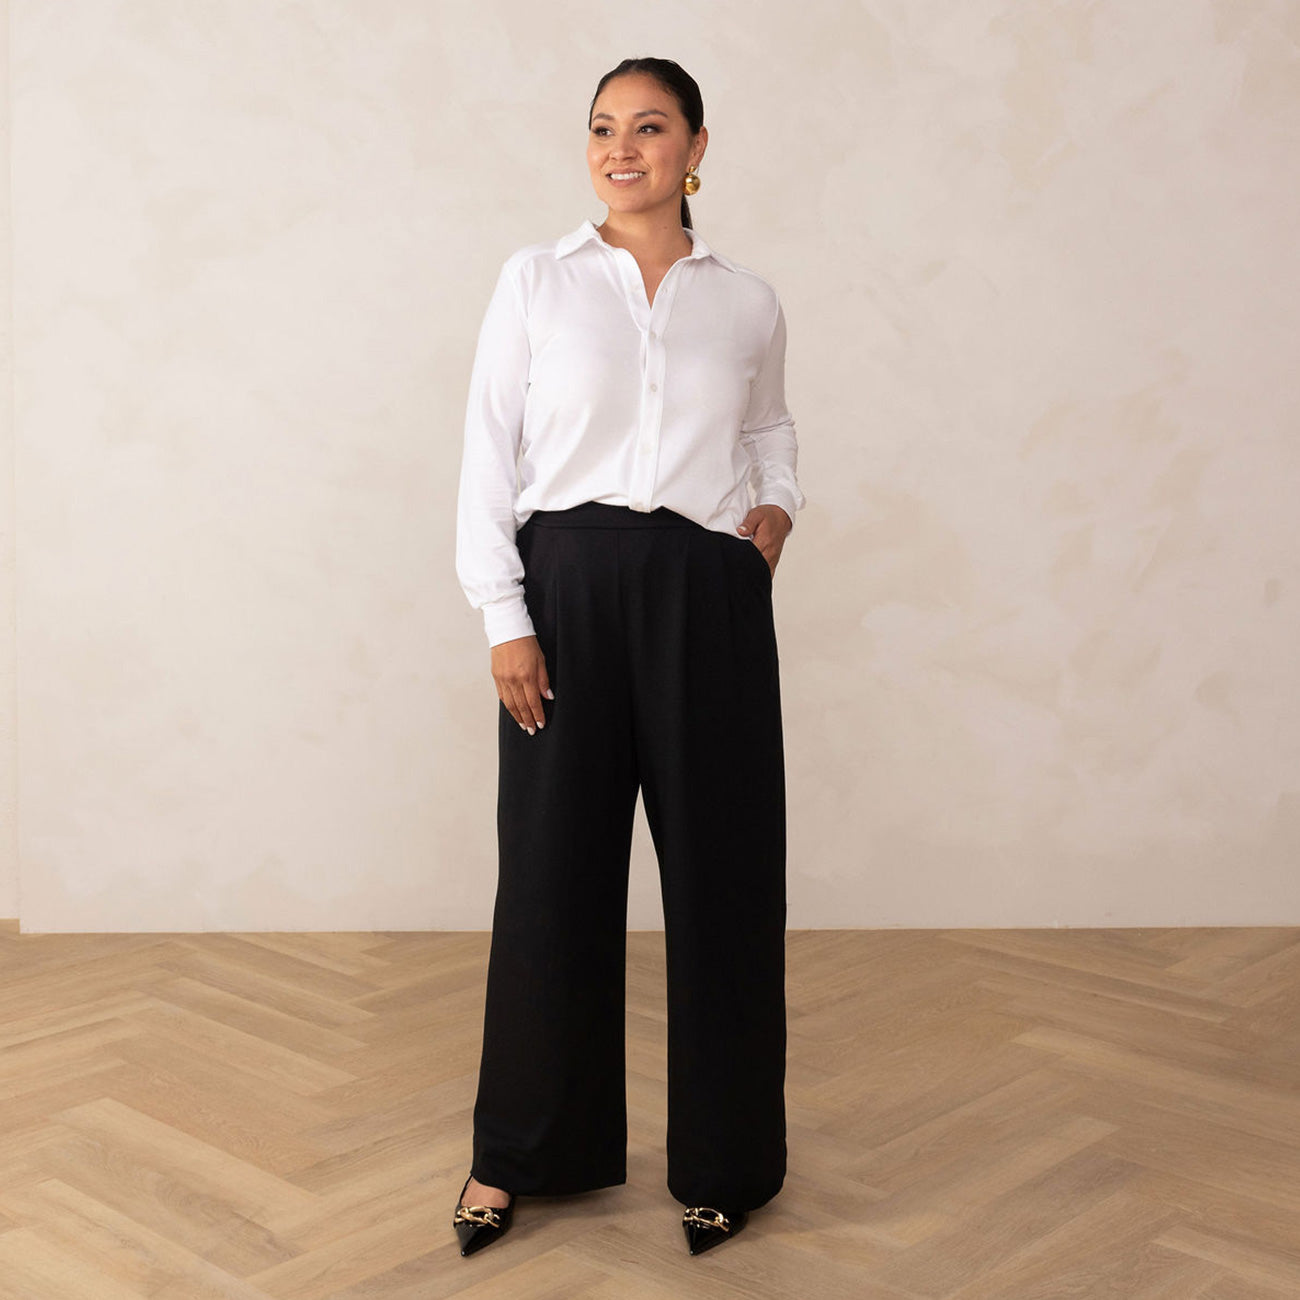 Trousers, Women's clothing